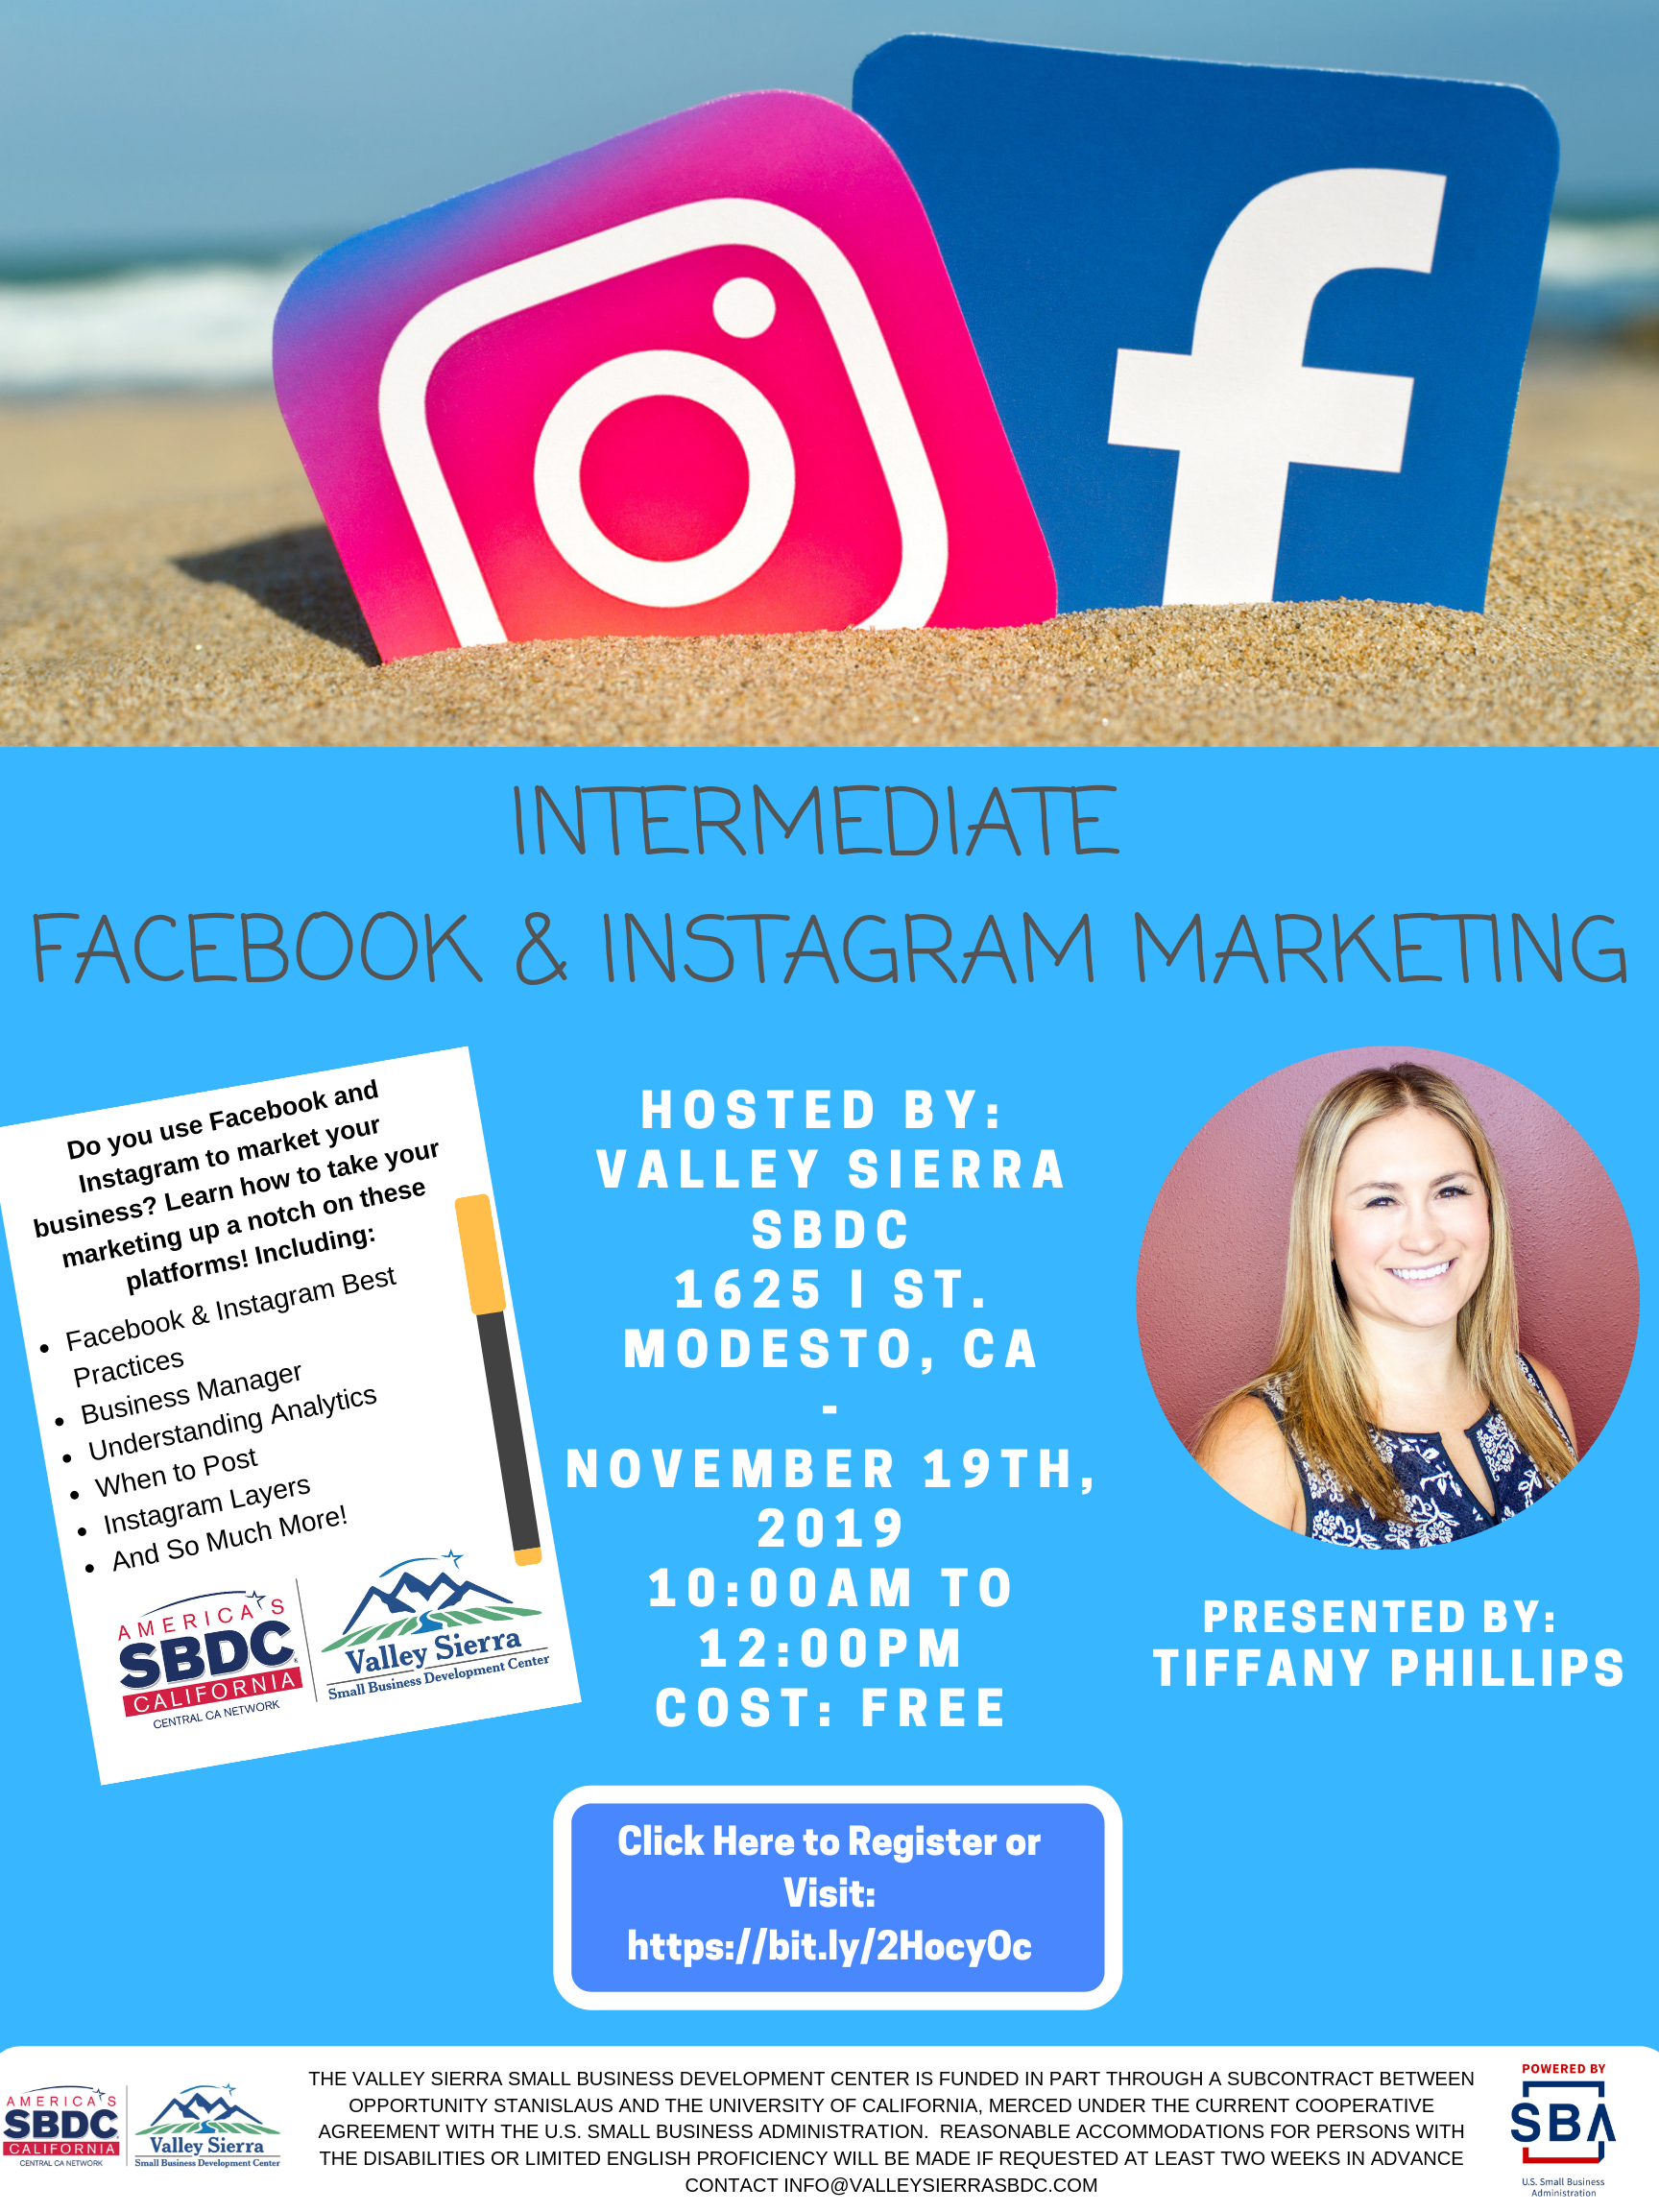 Event Flyer, INTERMEDIATE FACEBOOK & INSTAGRAM MARKETING PRESENTED BY: TIFFANY PHILLIPS  Do you use Facebook and Instagram to market your business? Learn how to take your marketing up a notch on these platforms! Including: Facebook & Instagram Best Practices, Business Manager, Understanding Analytics, When to Post, Instagram Layers And So Much More! 1625 I Street, Modesto Ca. November 19th, 2019.